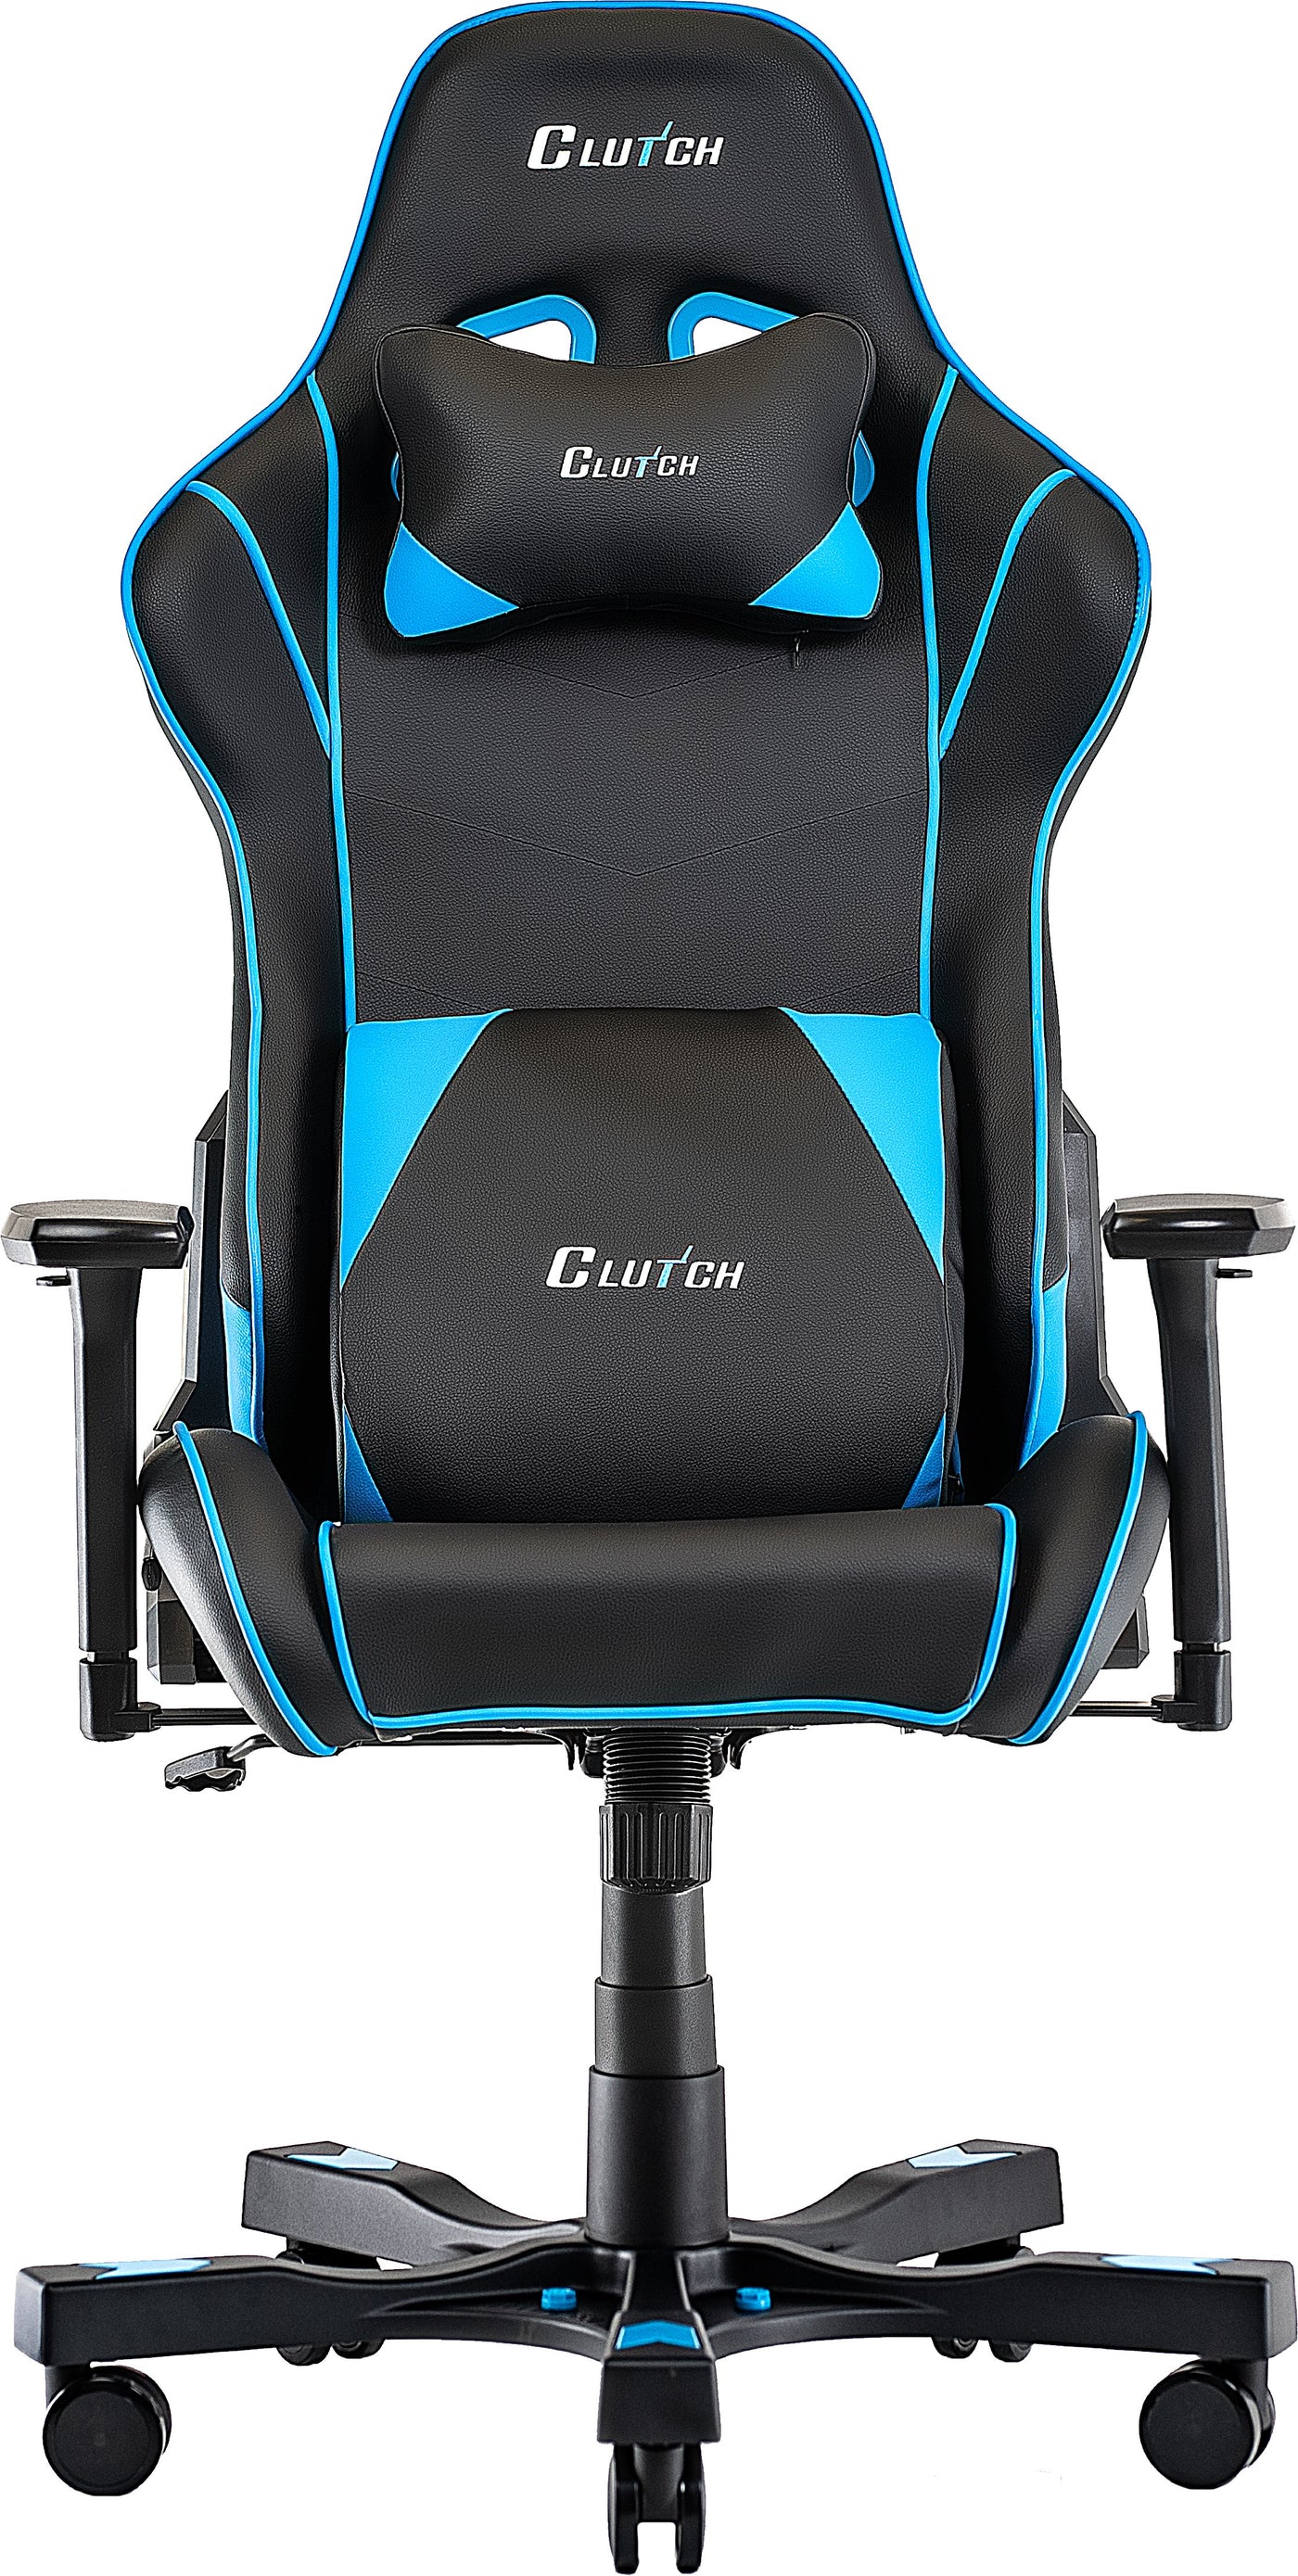 Crank Series - Delta (SM-MD) Gaming Chair Clutch Chairz 